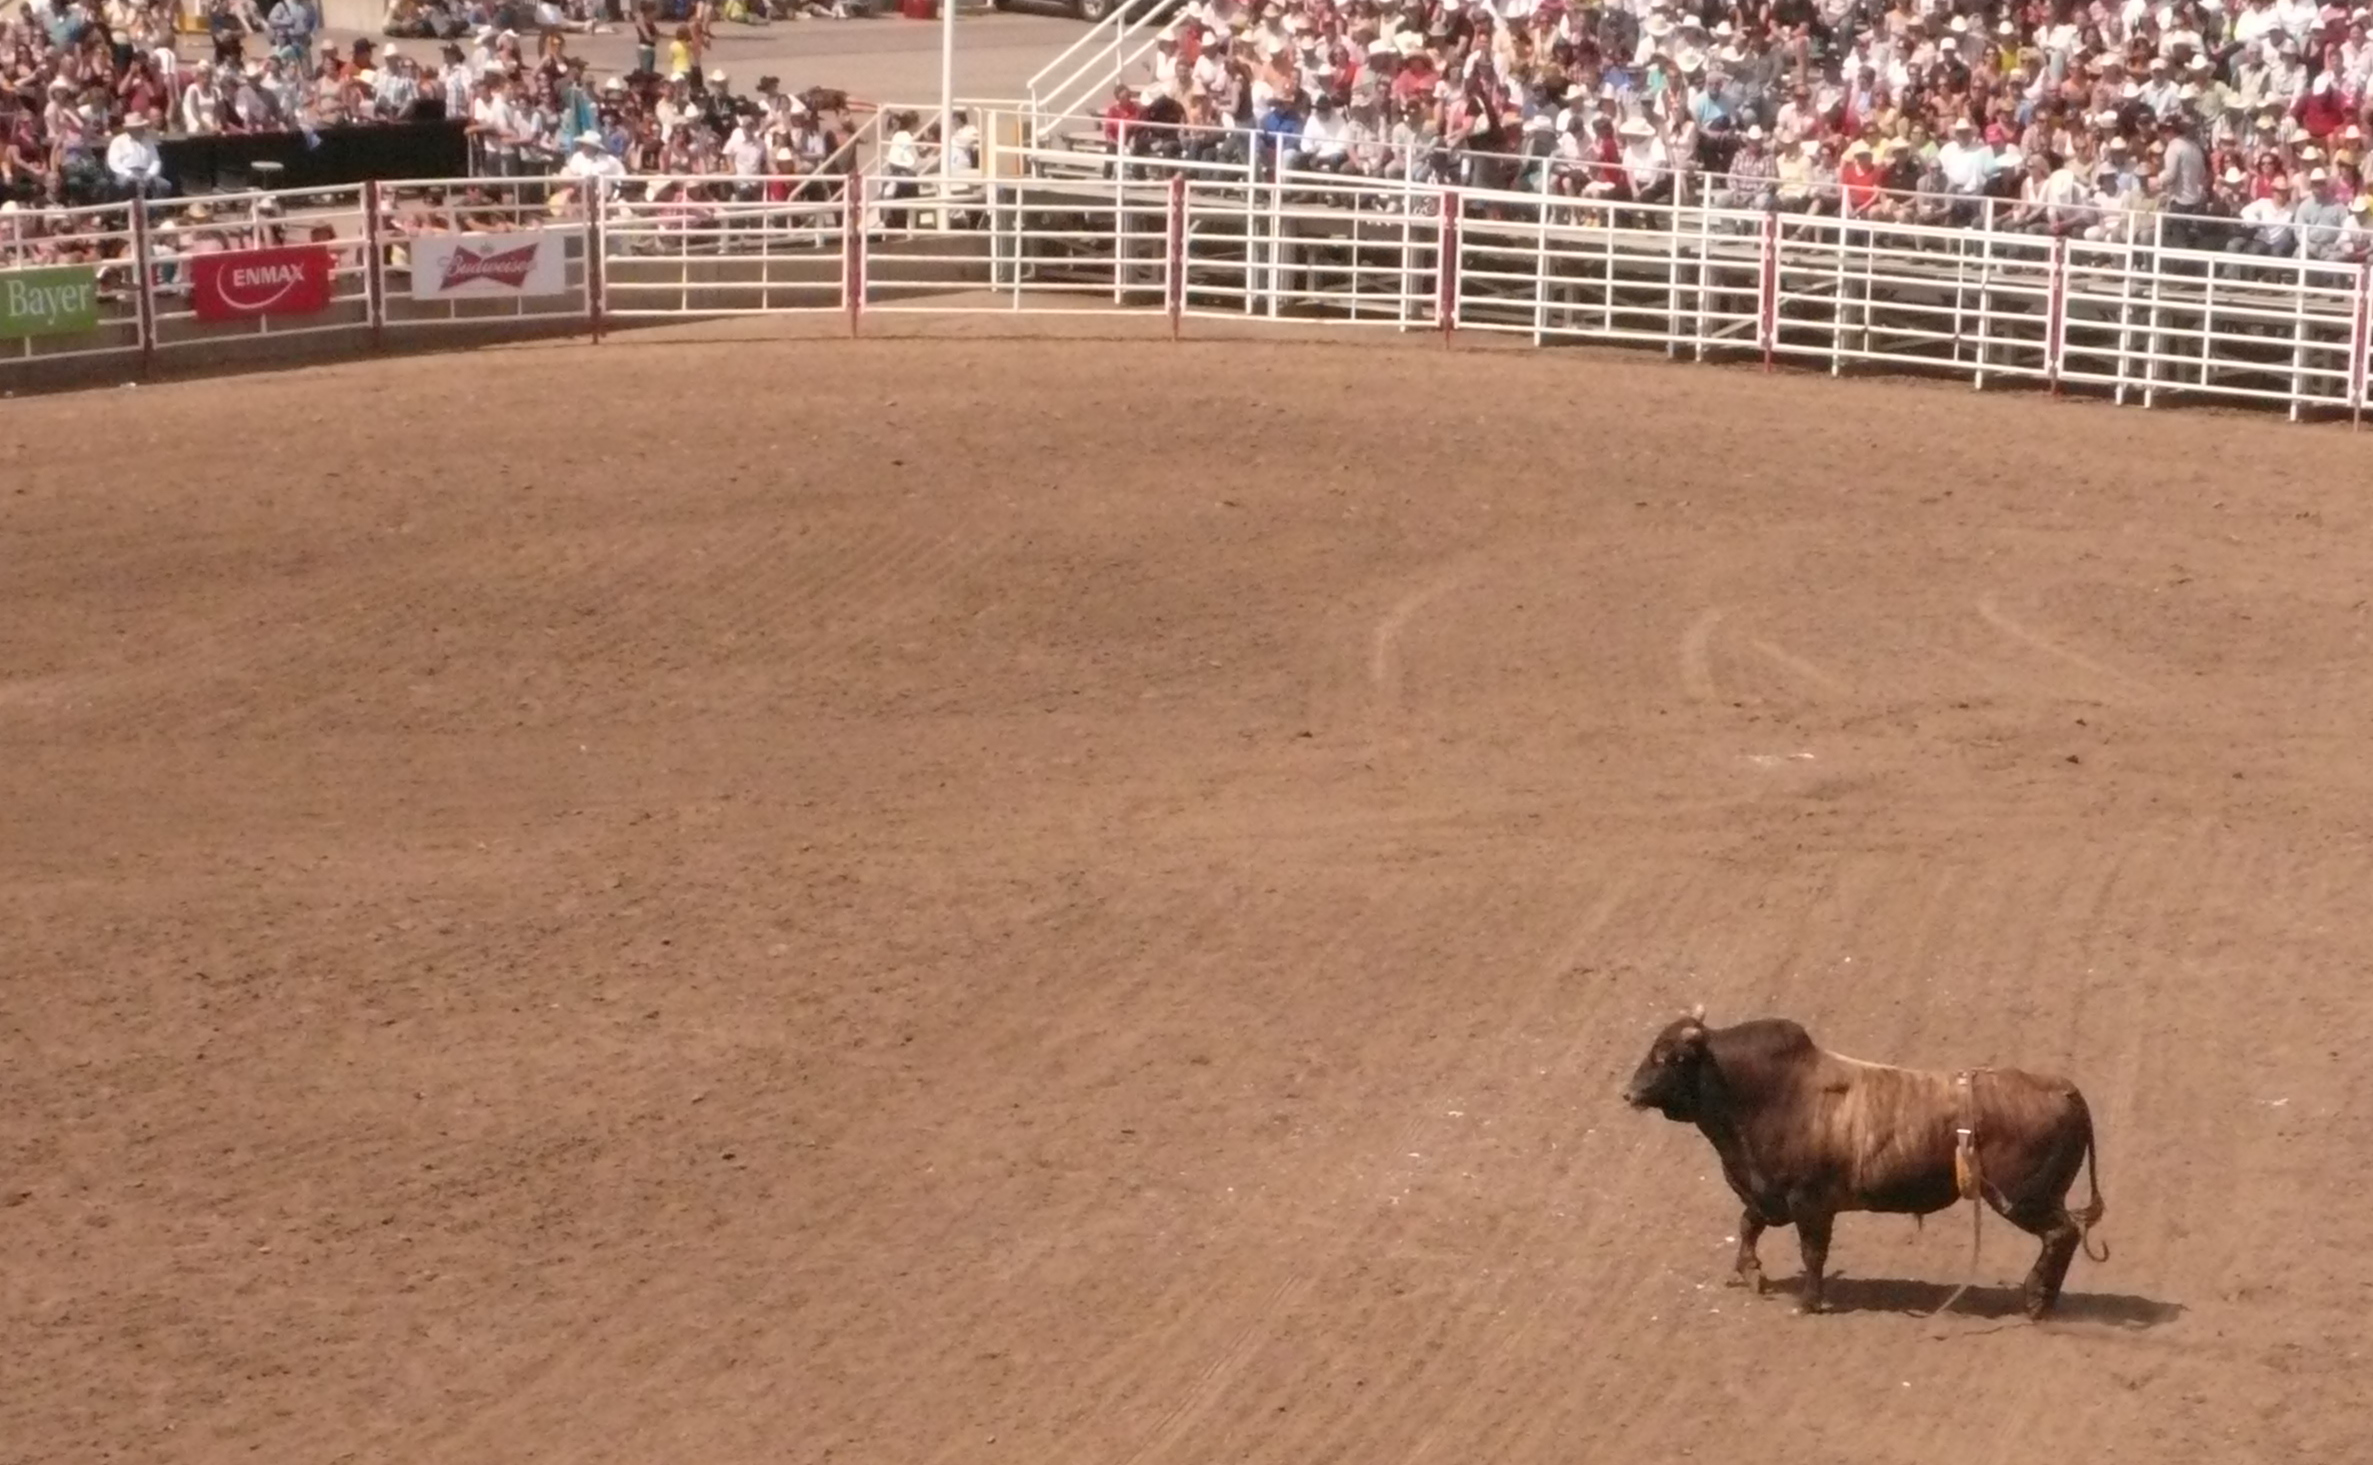 a bull standing on the sand in front of a crowd